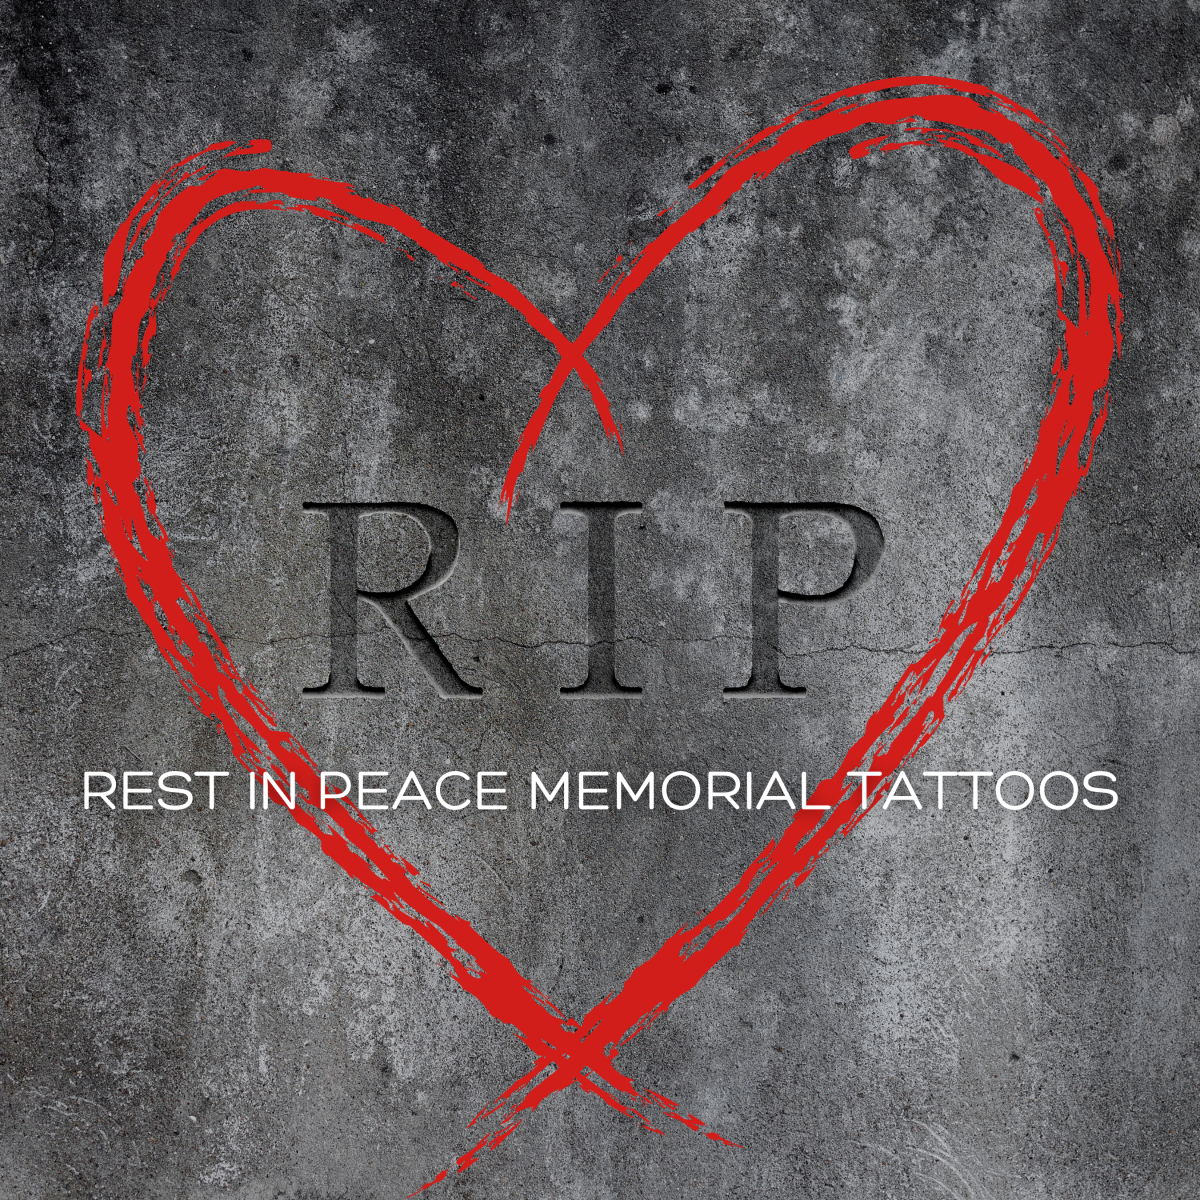 Rest In Peace (R.I.P.) Memorial Tattoos: Design Ideas, Symbols, and Meanings